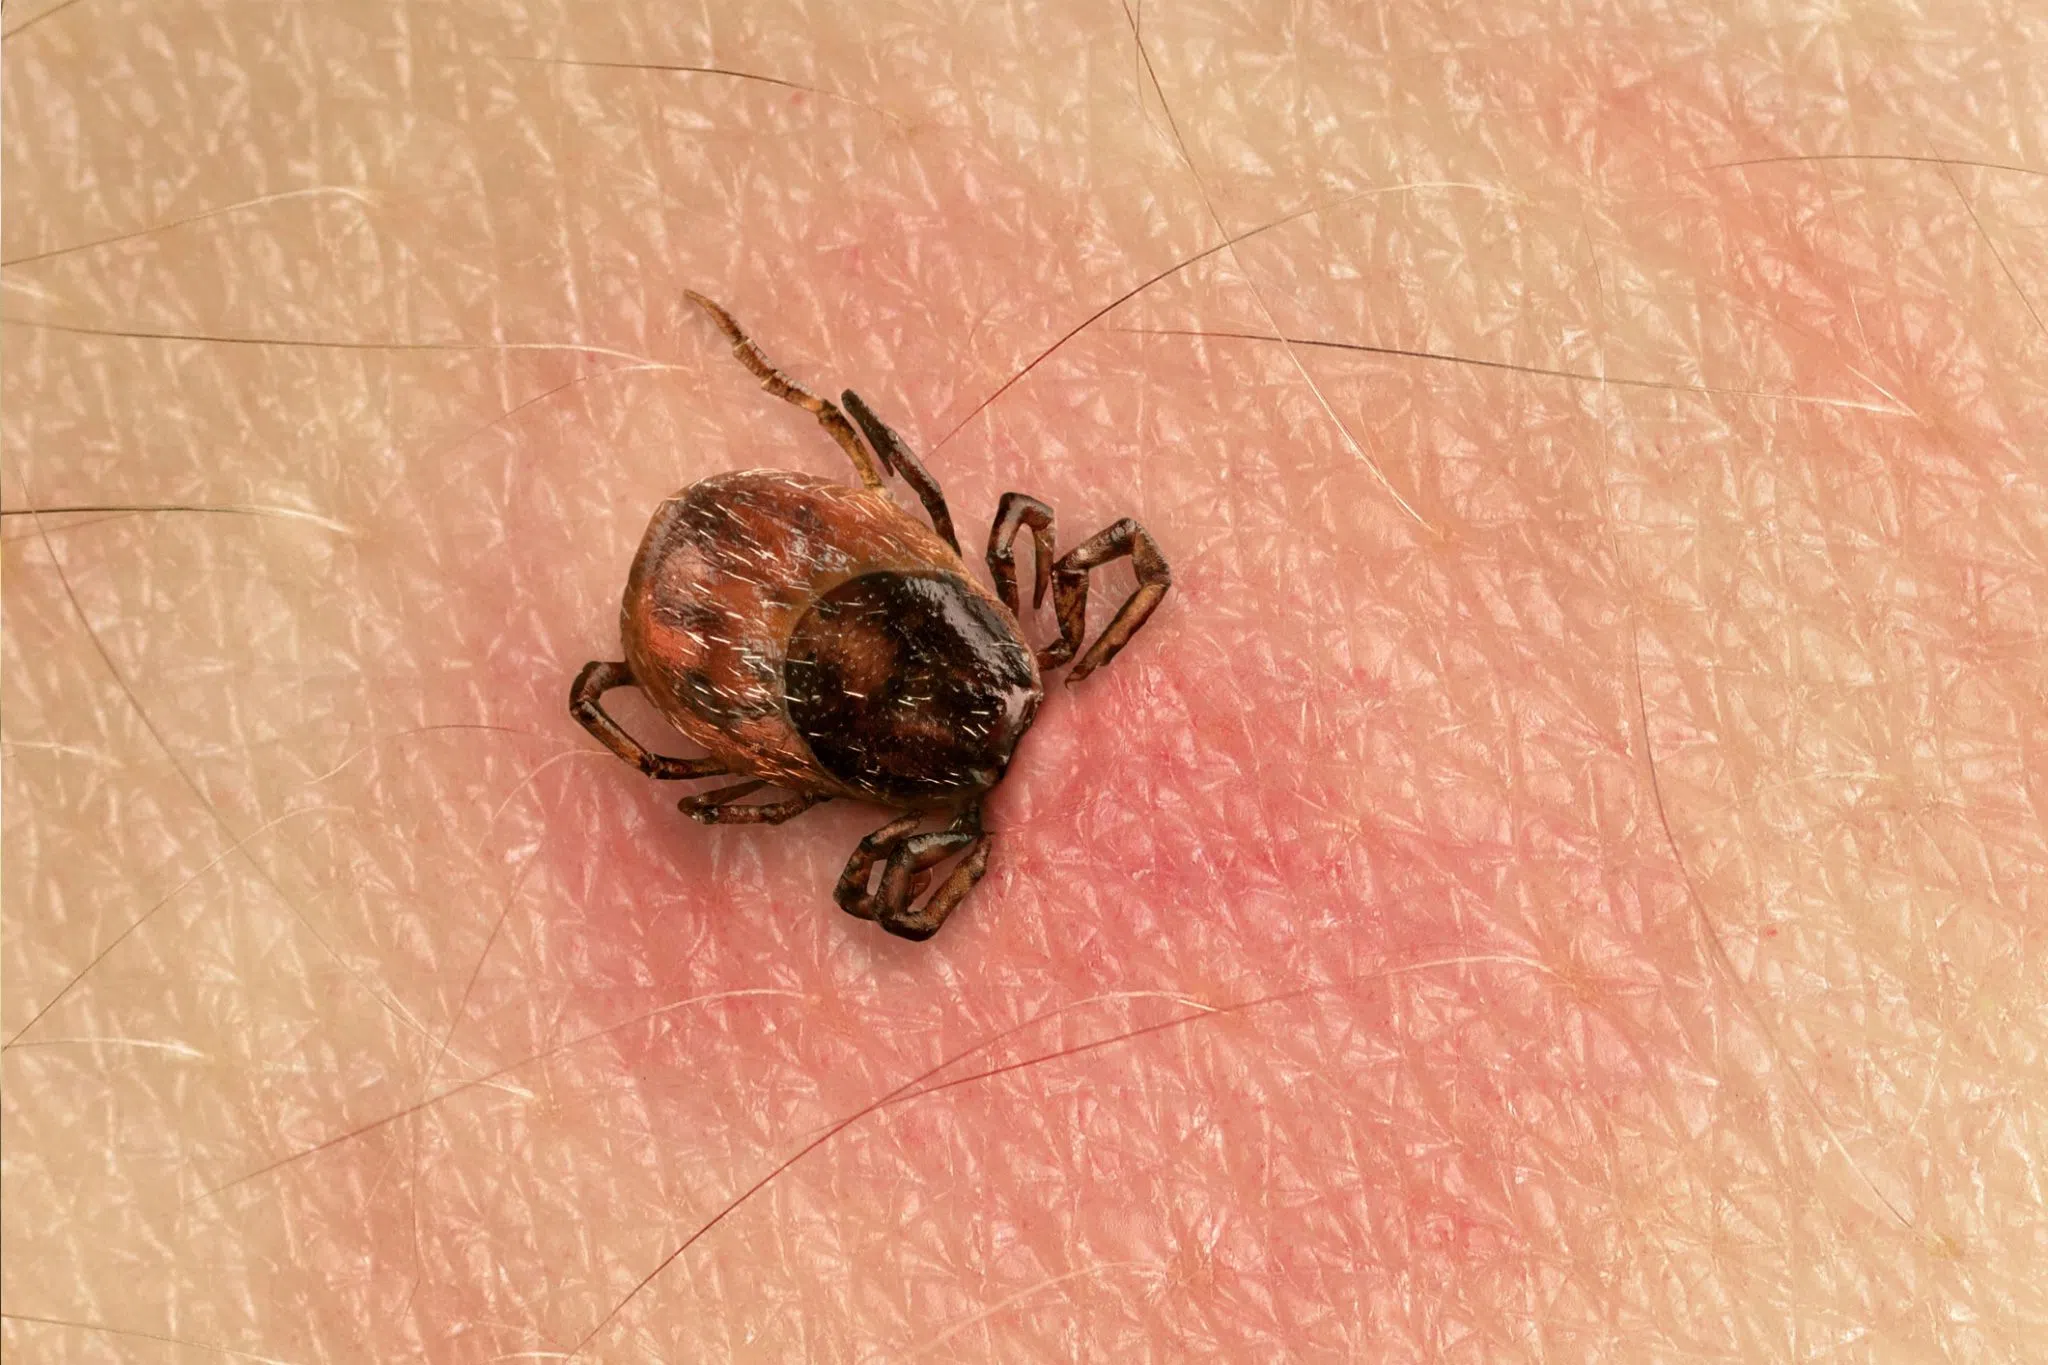 Grey Bruce Health Unit Offers Tips To Avoid Contracting Lyme Disease During Tick Season